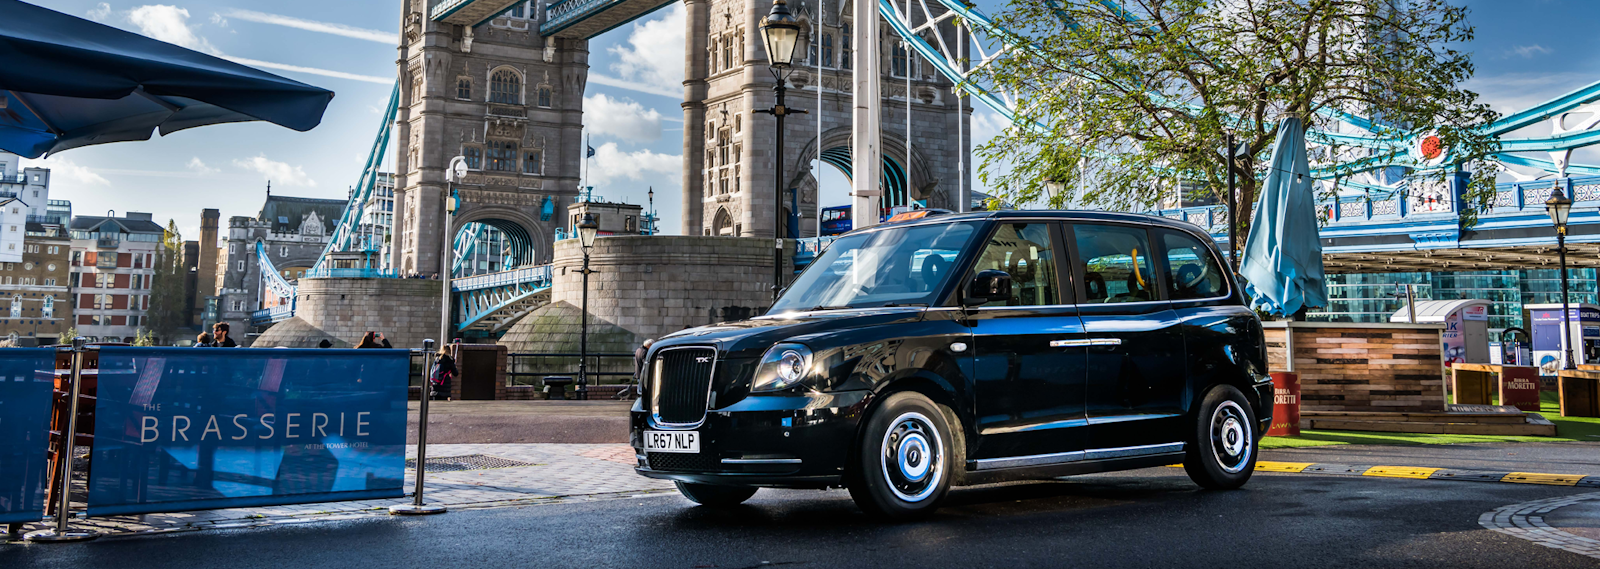 London and electric taxi